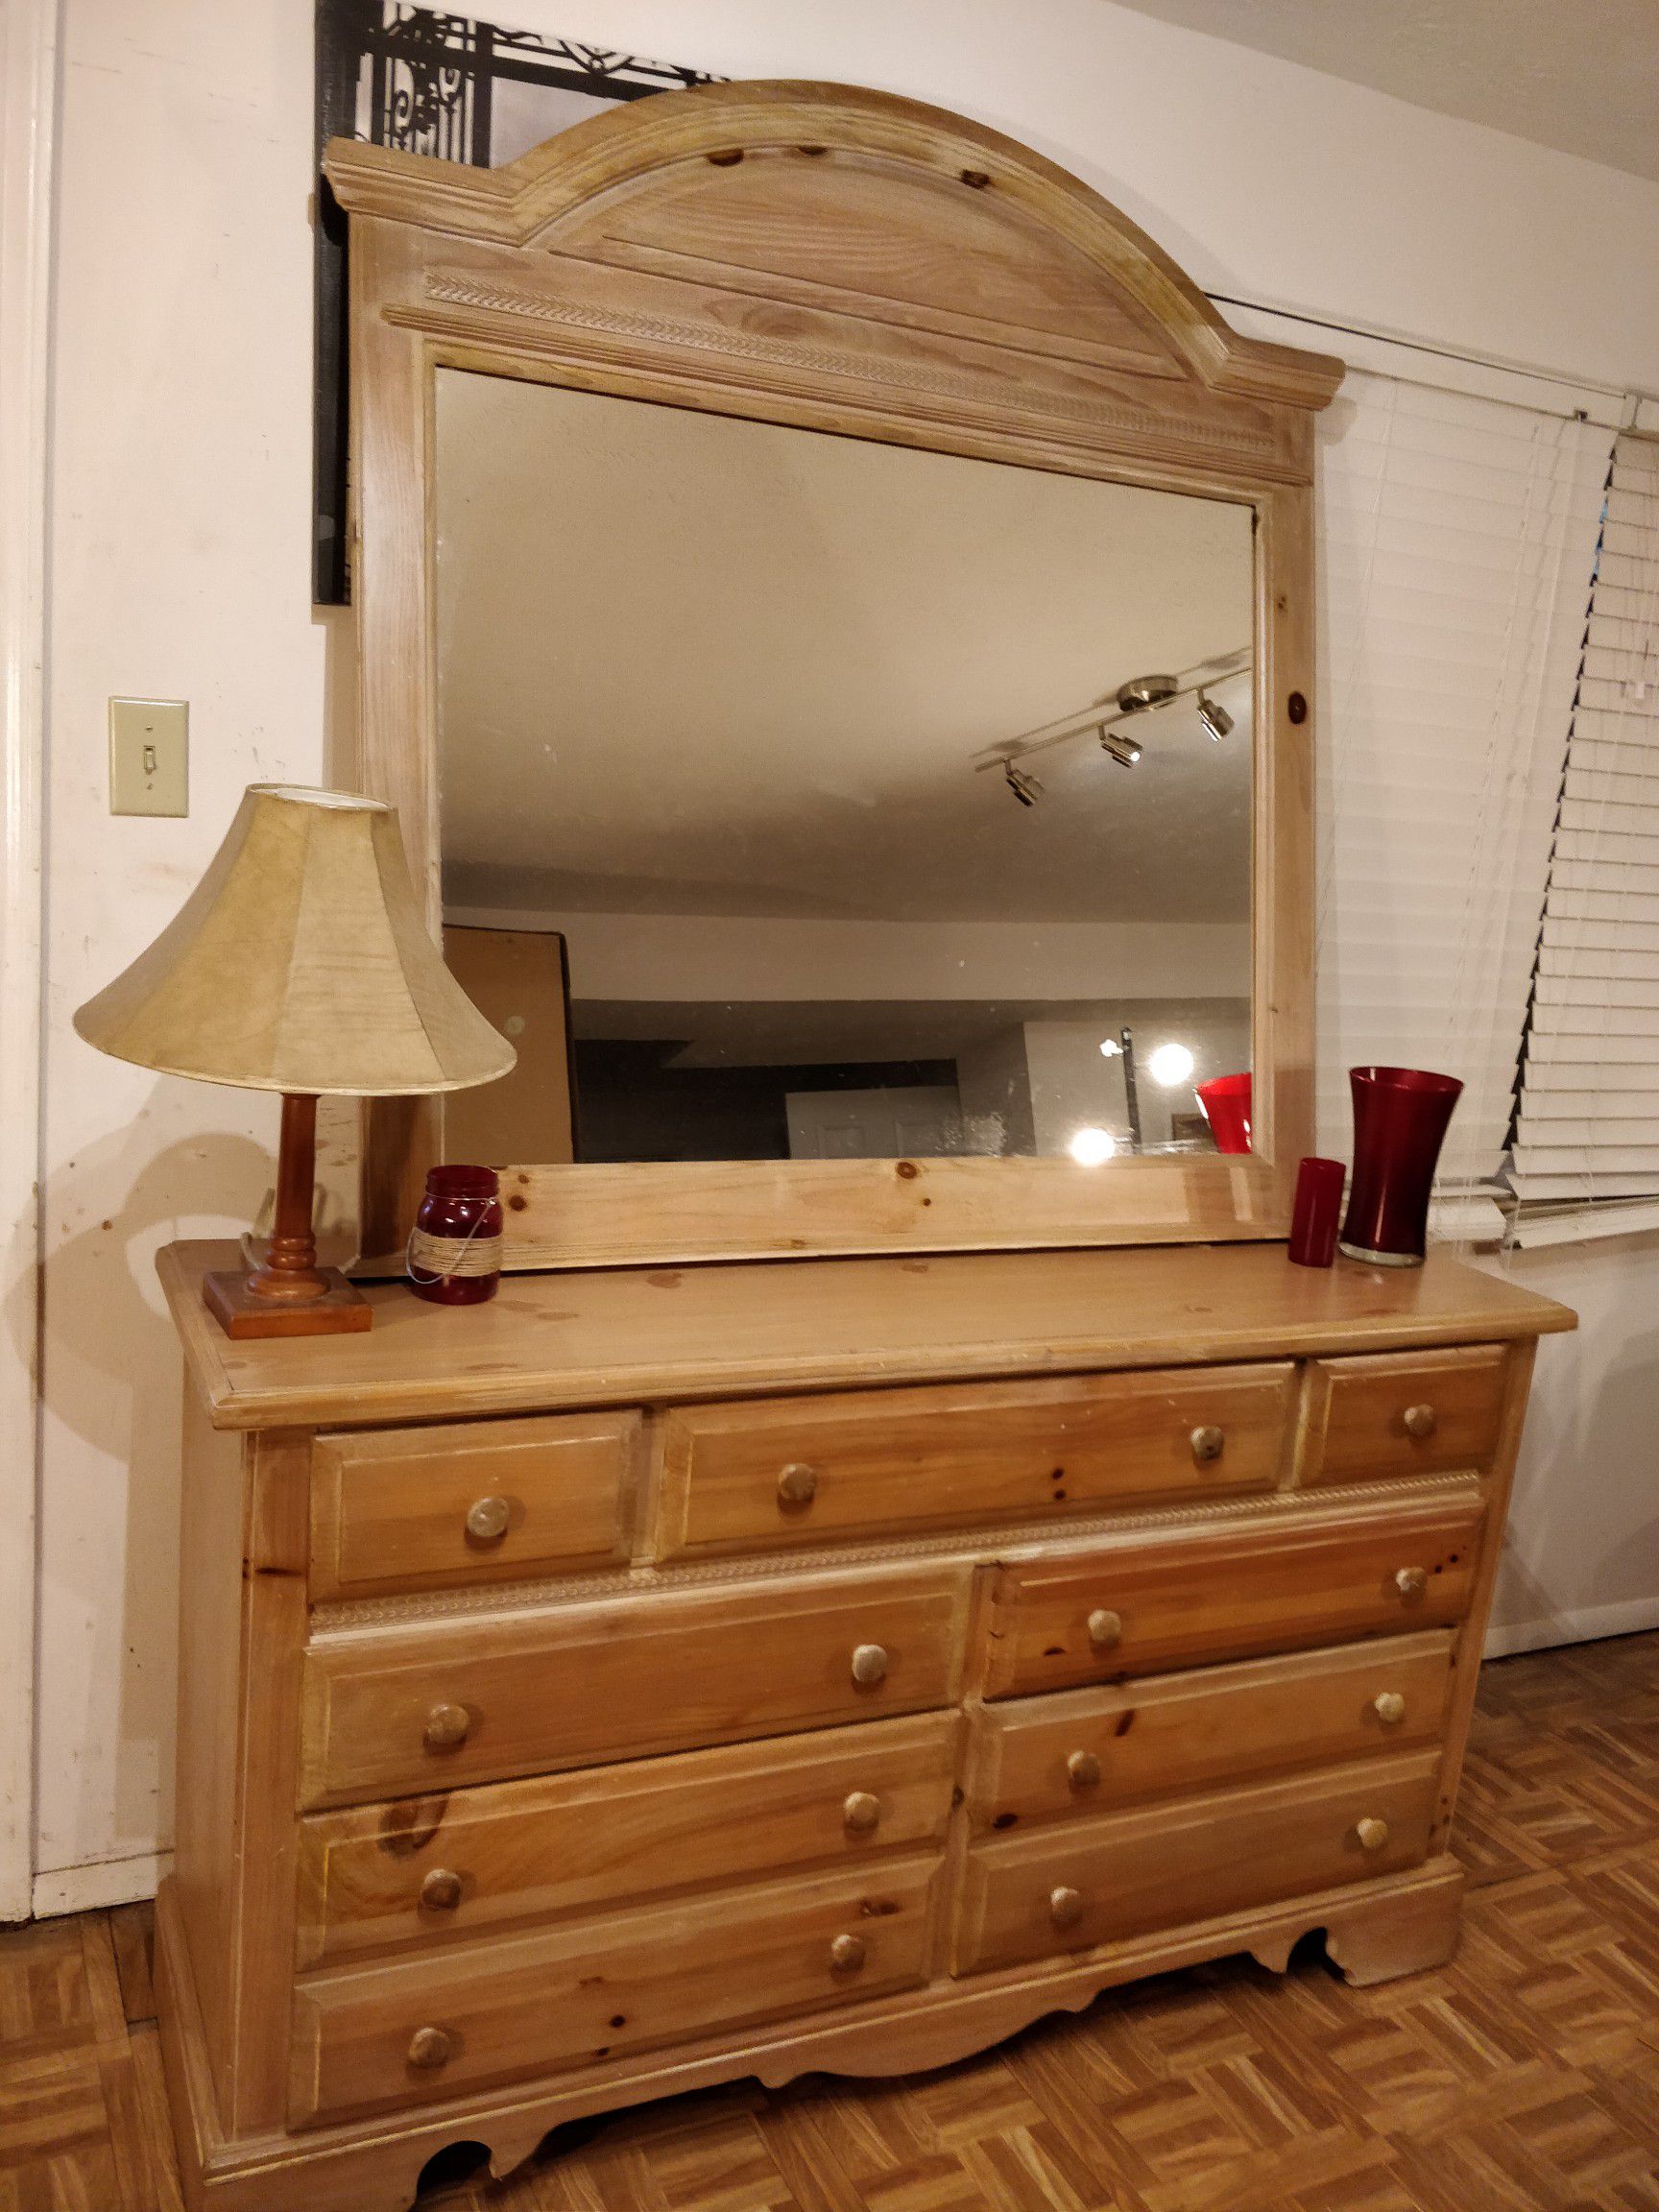 Nice wooden dresser with big drawers and big mirror in good condition. L60"*W18.5"*H34.5"